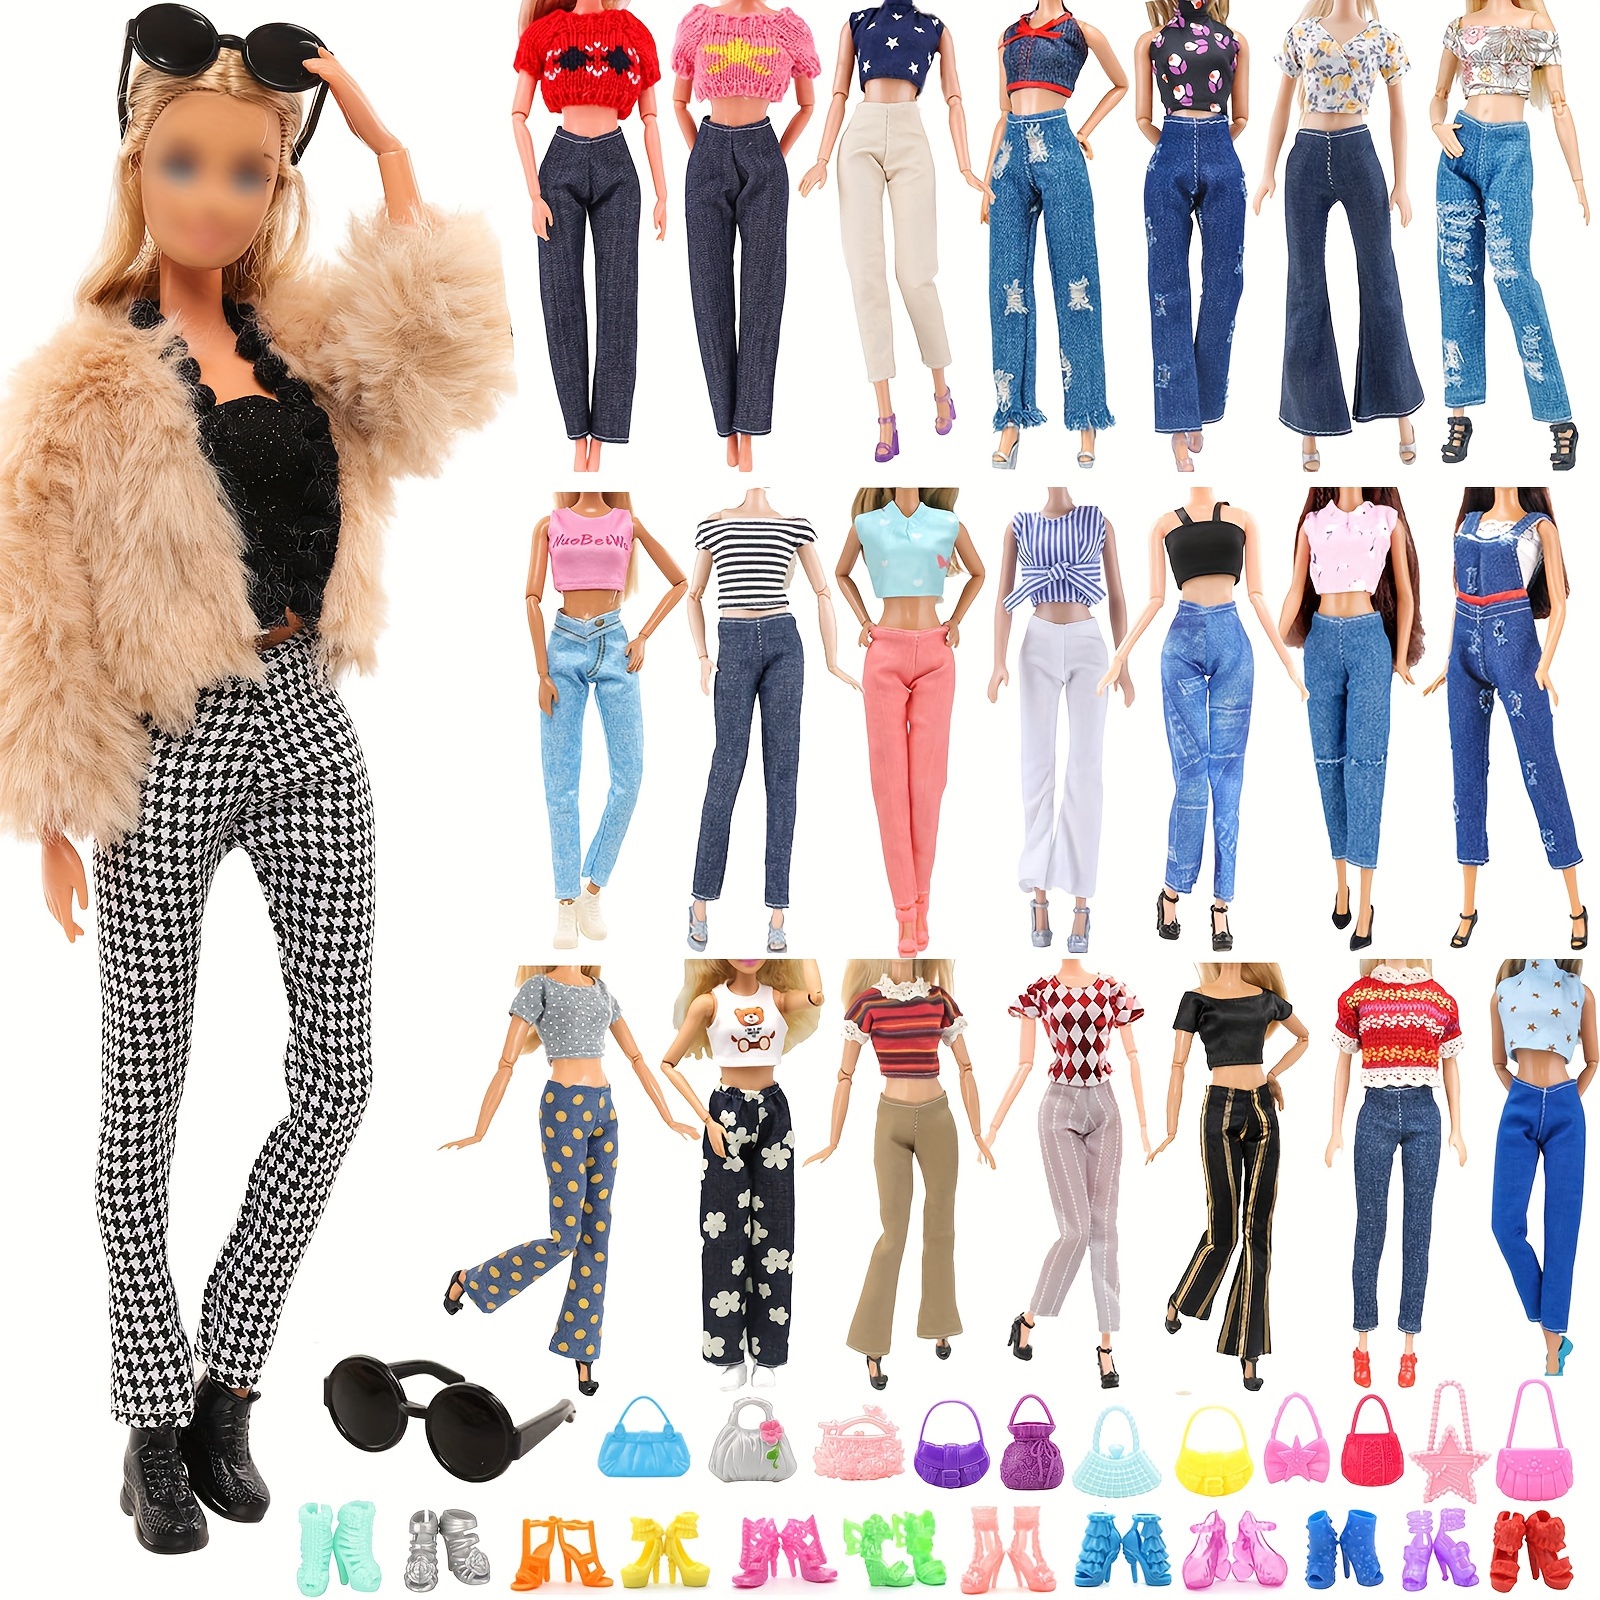 16 PCS Clothes and Accessories for Barbie 11.5 inch Doll Including 6  Handmade Fshion Wear Outfits ( Tops and Pants or Dress) and 10 Pair of  Shoes in